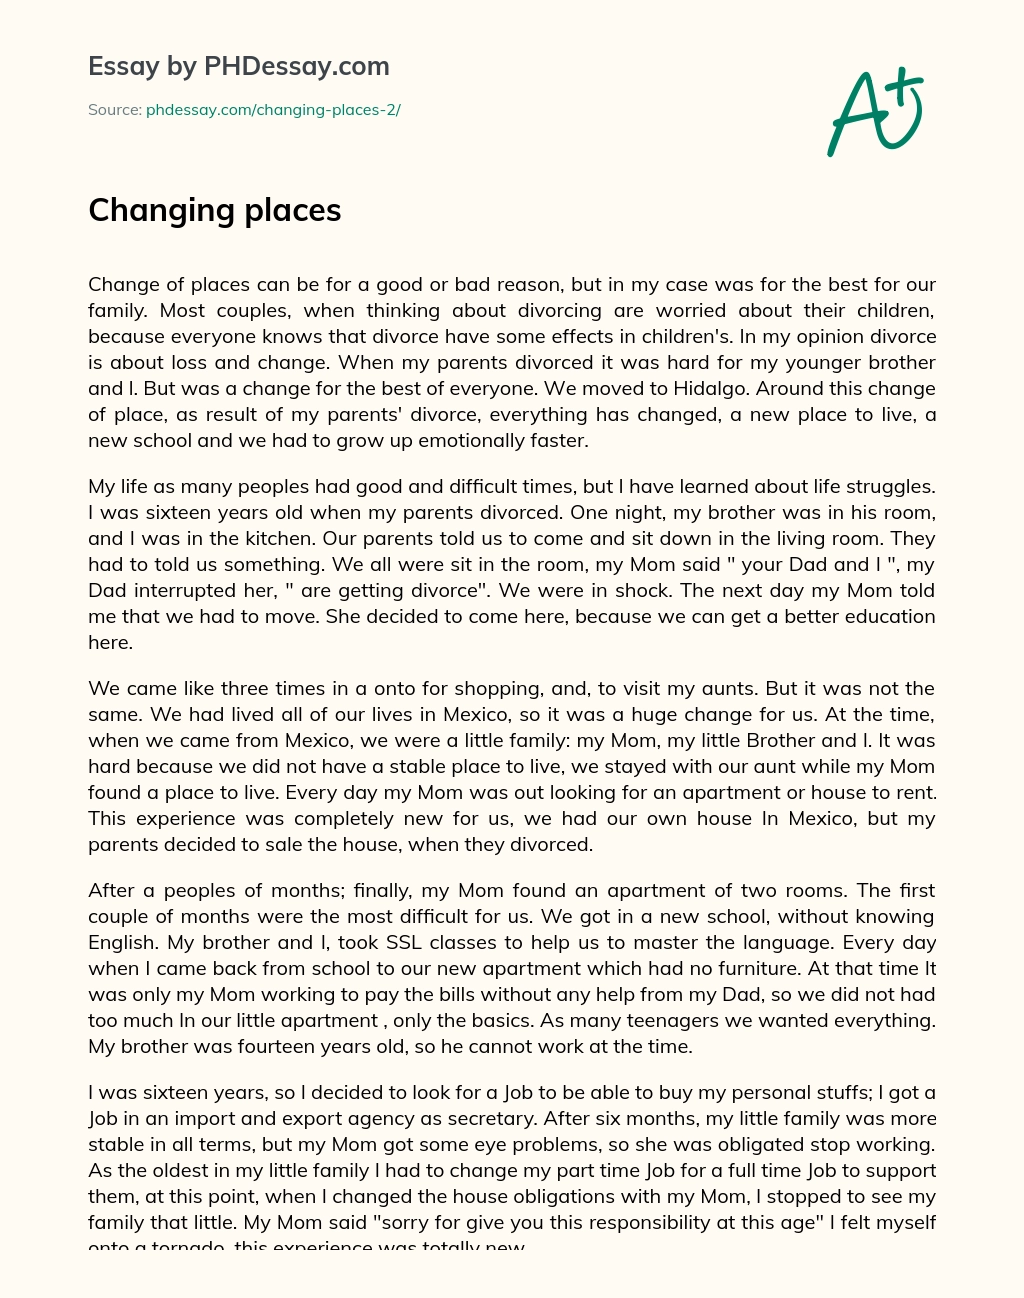 Changing places essay